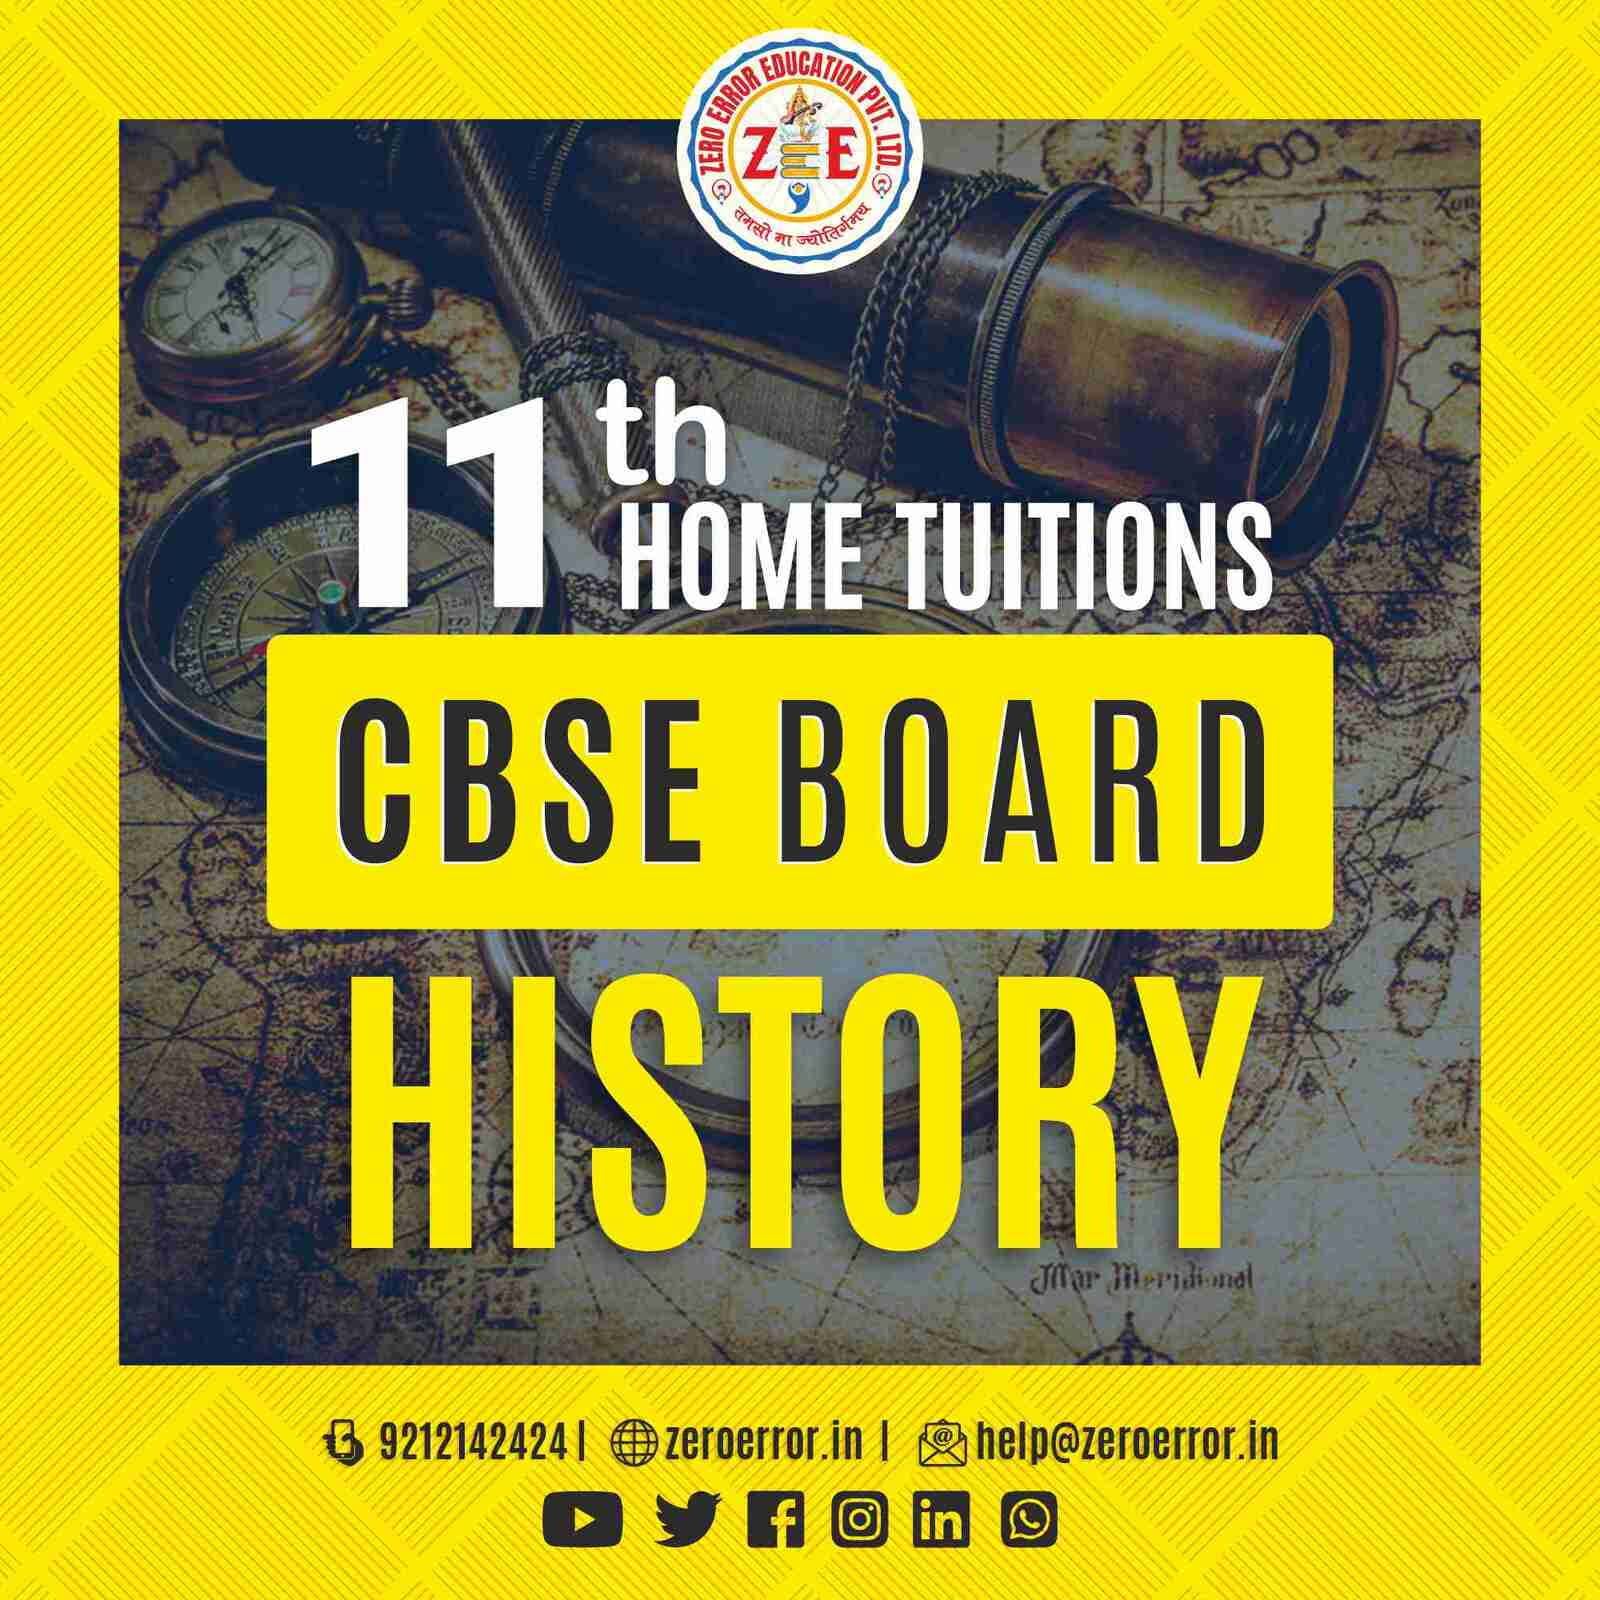 11th Grade CBSE History Online Classes by Zero Error Education Prepare for your CBSE board exams with online and offline History classes for 11th grade. Learn from experienced home tutors and get all the help you need to succeed. Enroll today at Zero Error Education. [https://zeroerror.in/] Call 9212142424 for more information.